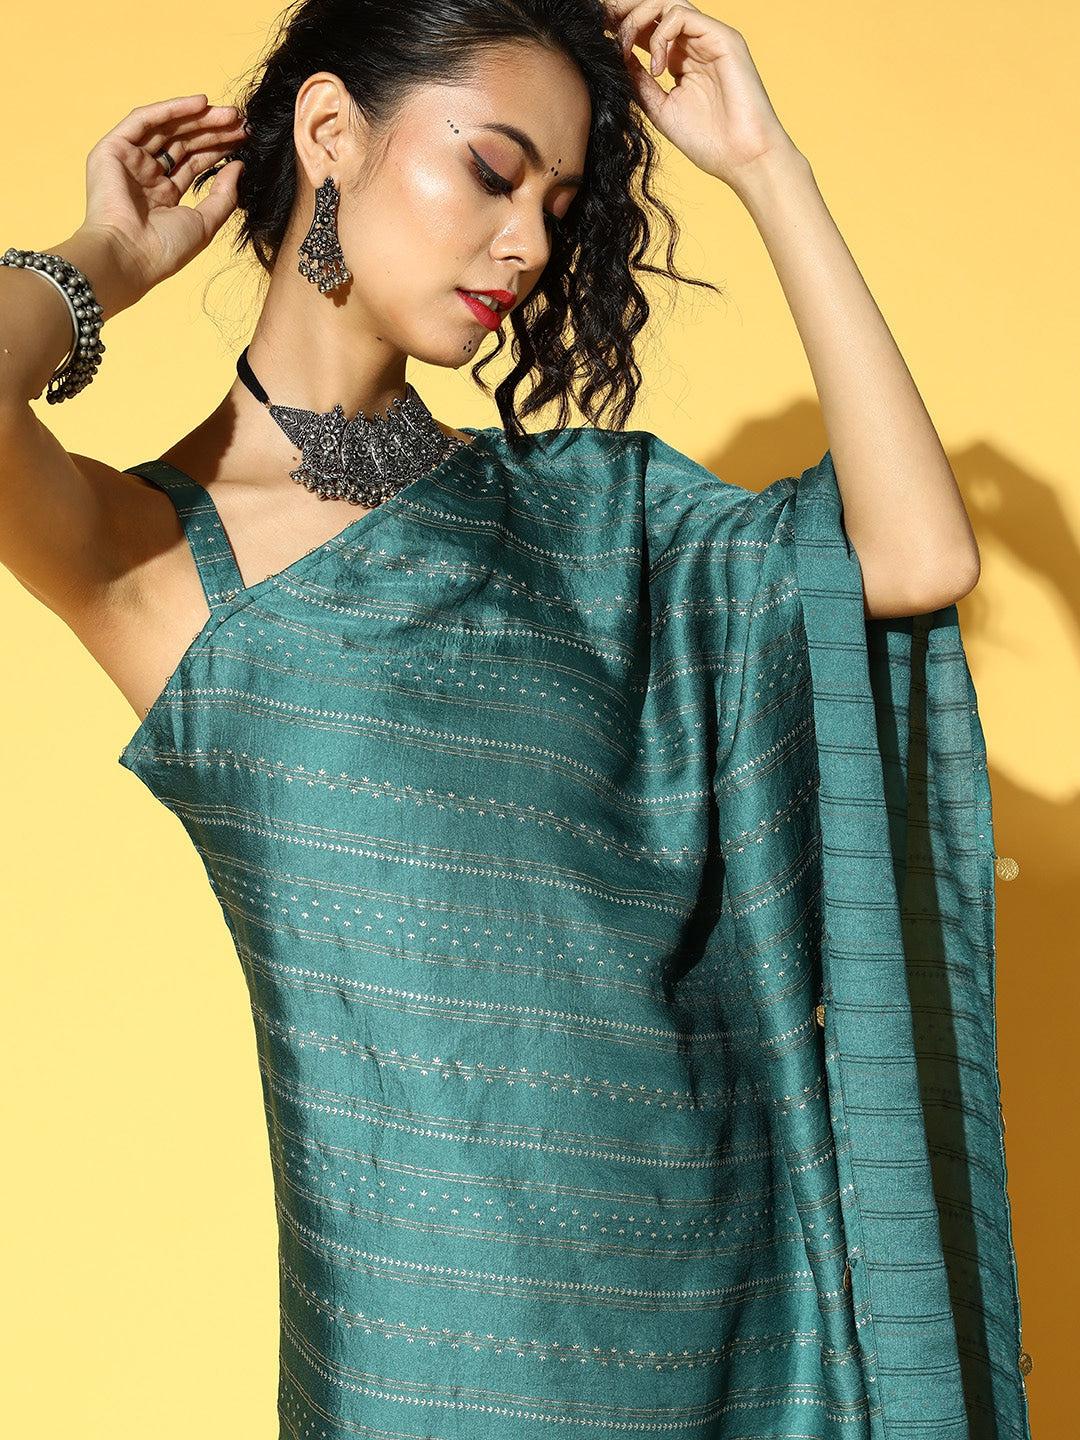 teal-green-golden-striped-co-ords-10140182GR, Women Indian Ethnic Clothing, Silk Blend Co-Ords